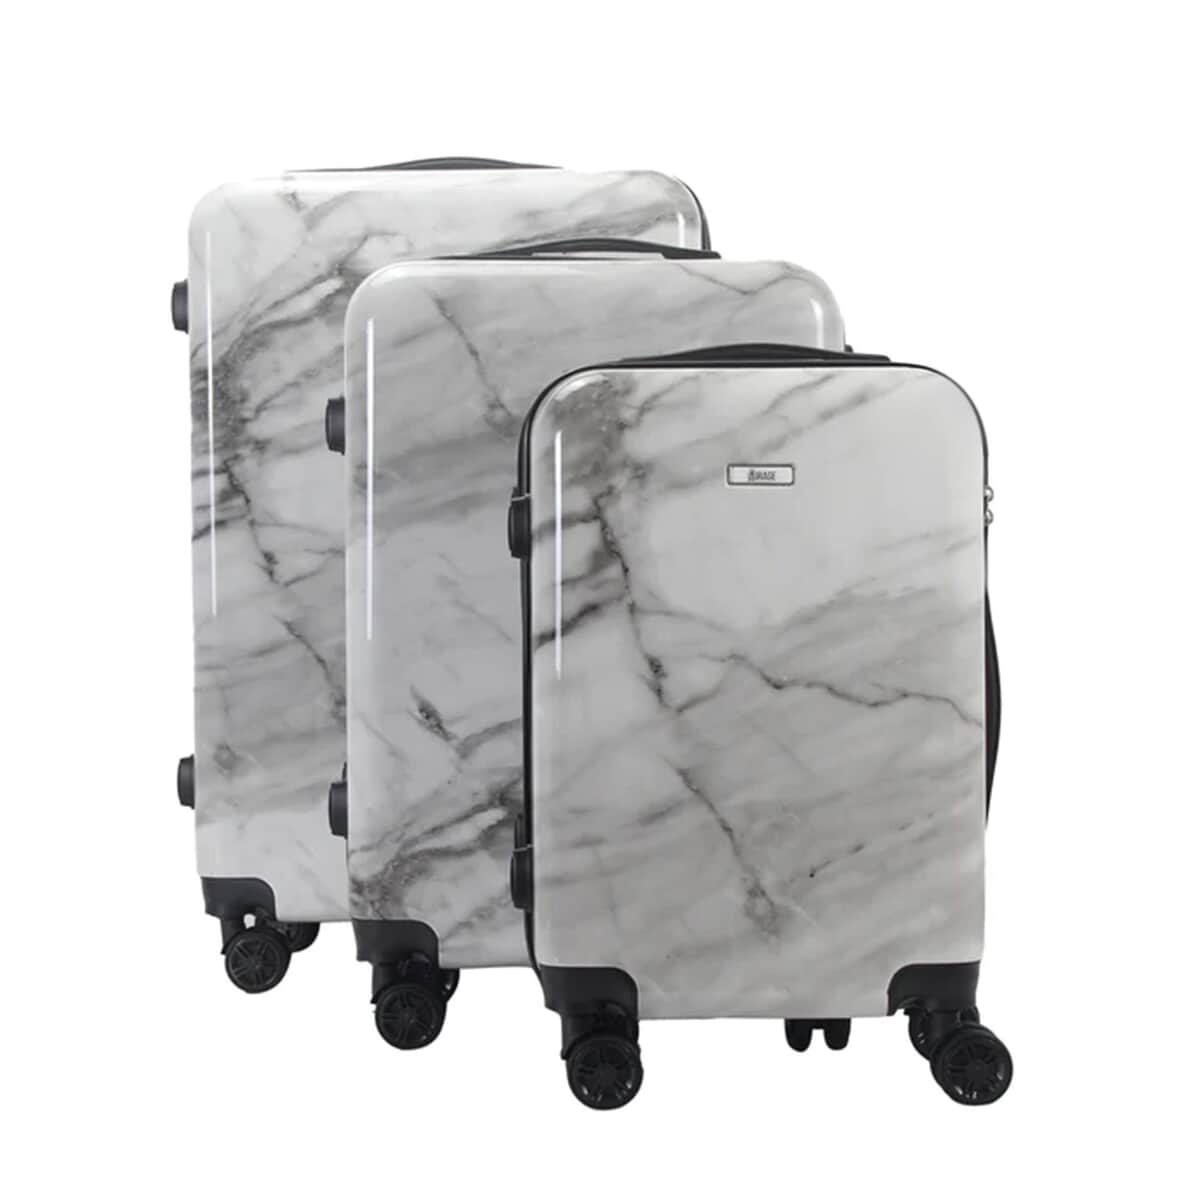 Mirage-Tanya 3 Piece White Marble    Luggage Set with 360 Dual Spinning Wheels and Combo Lock (28" 24", 20") image number 6